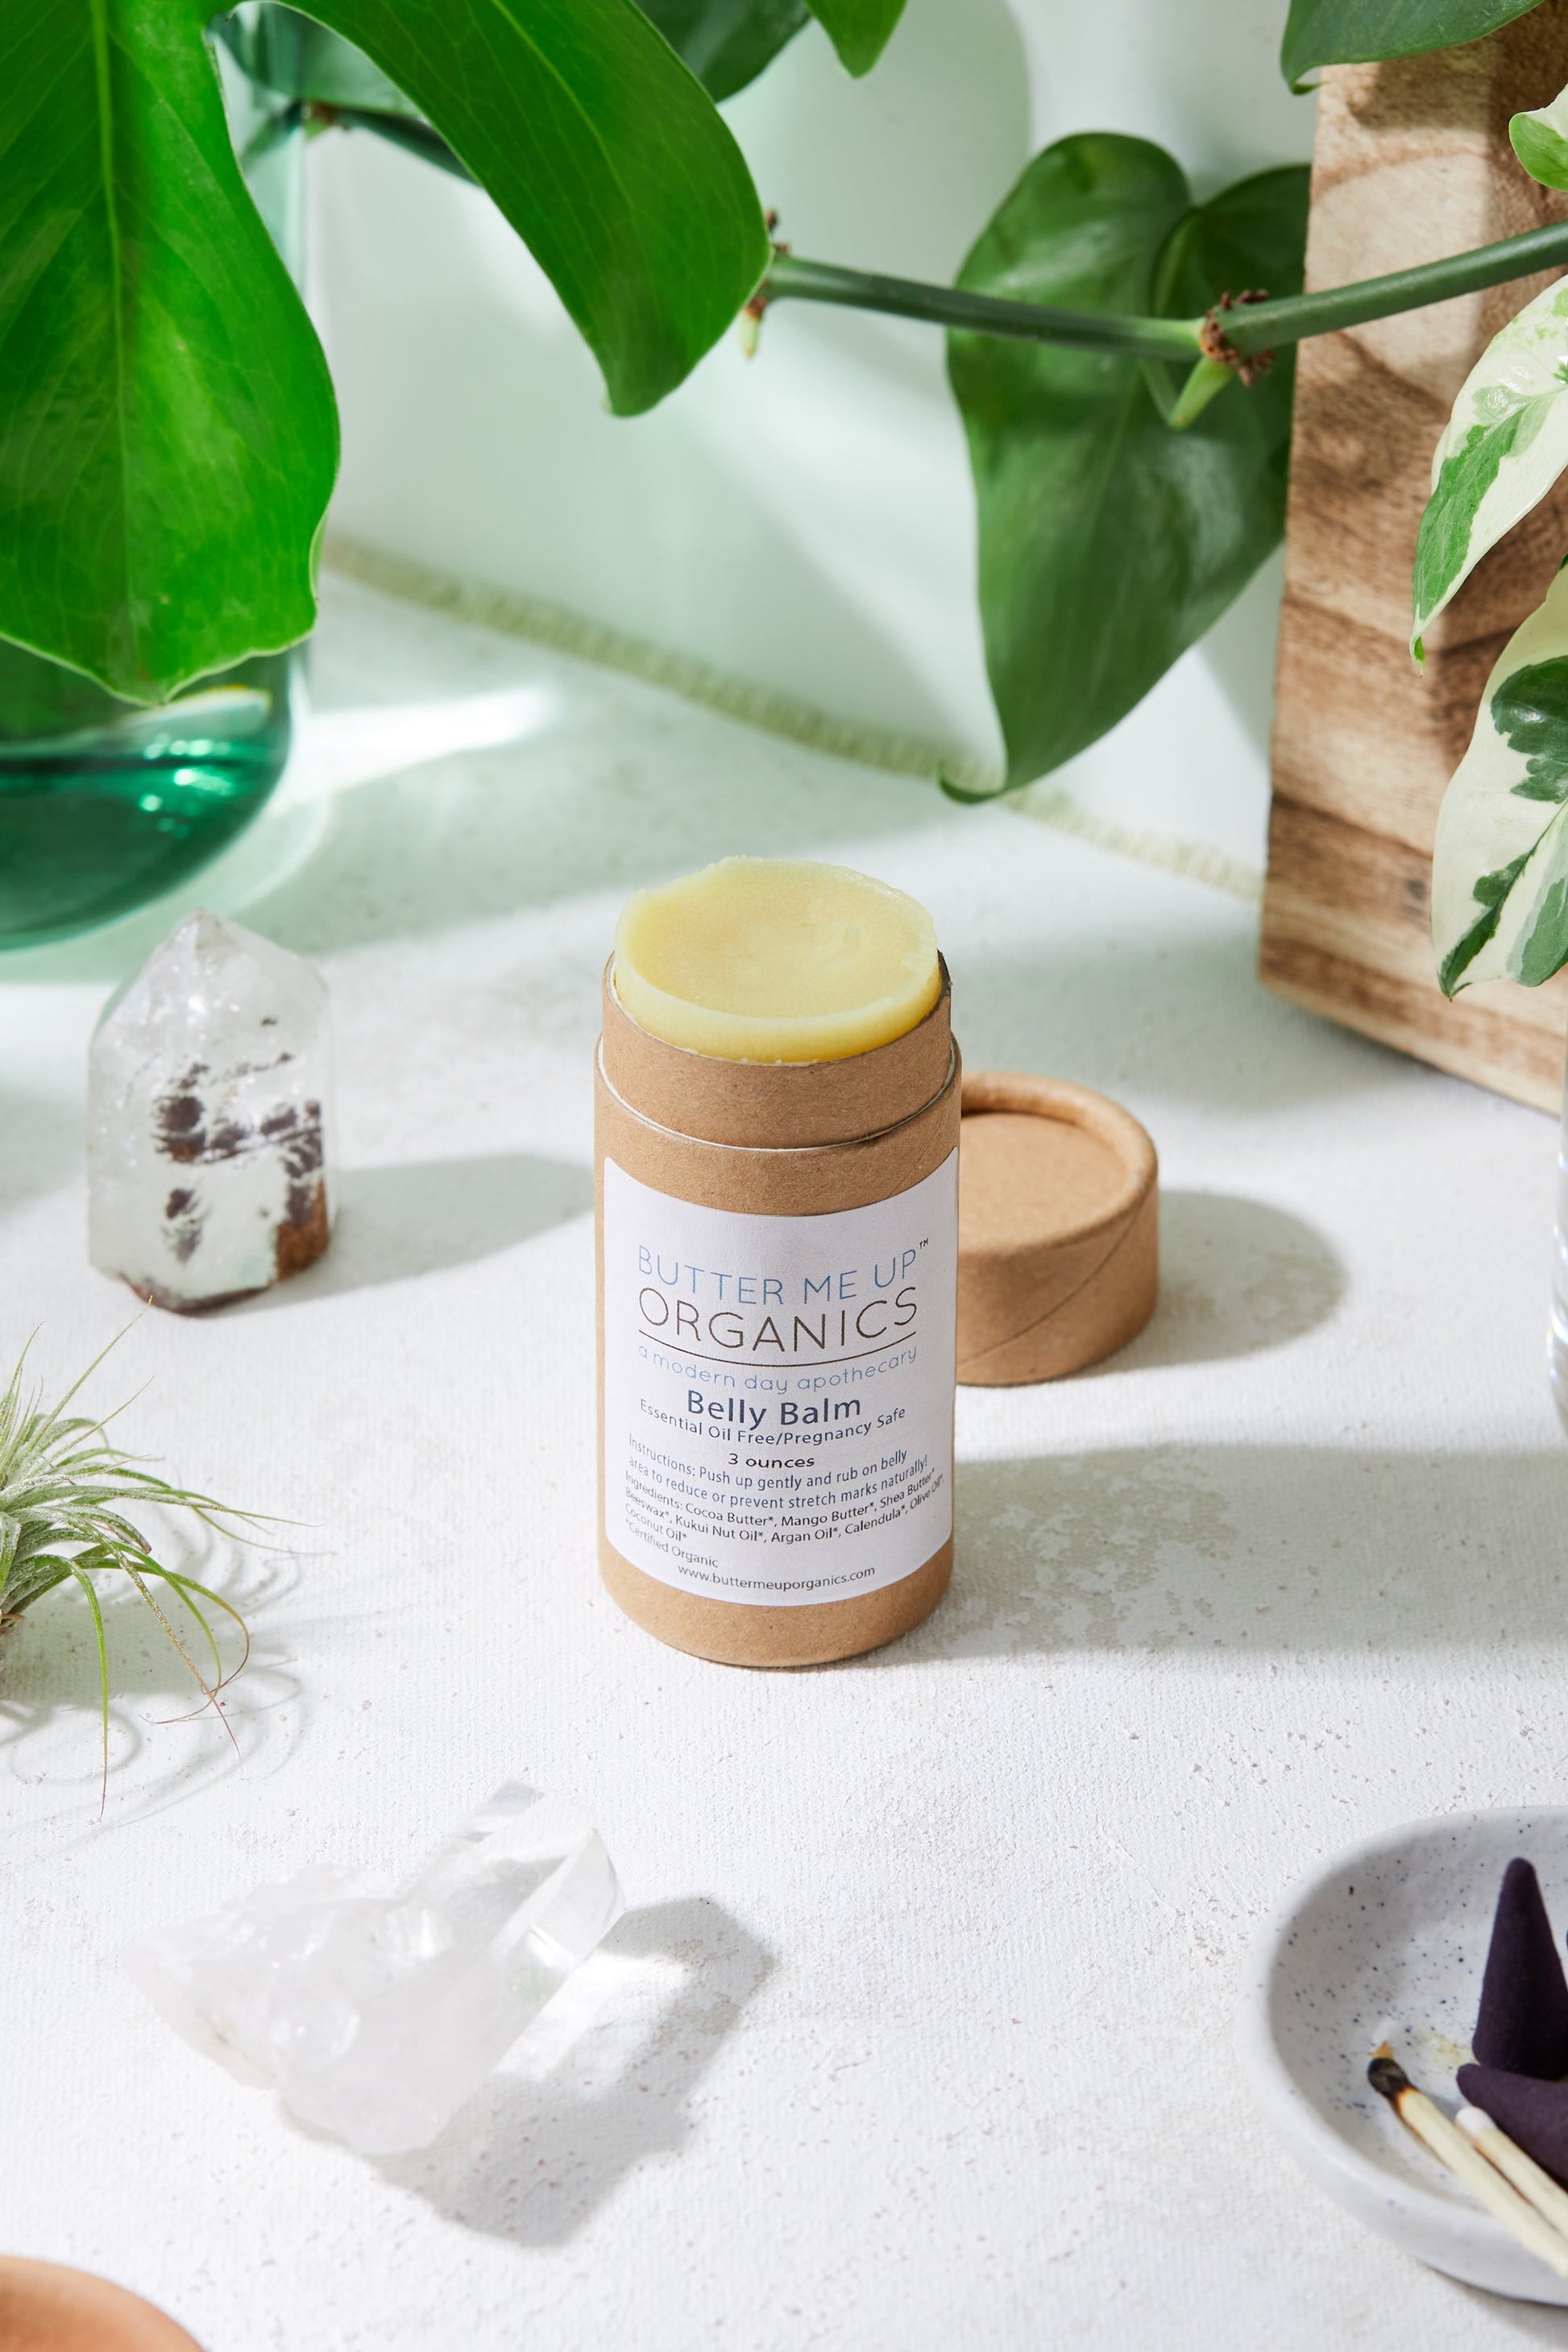 A cylindrical container of "White Smokey Belly Balm / Organic Pregnancy Balm / Stretch Mark Balm" placed on a white surface, surrounded by plants and crystals, showcases its commitment to hydrating skin care and stretch mark prevention.